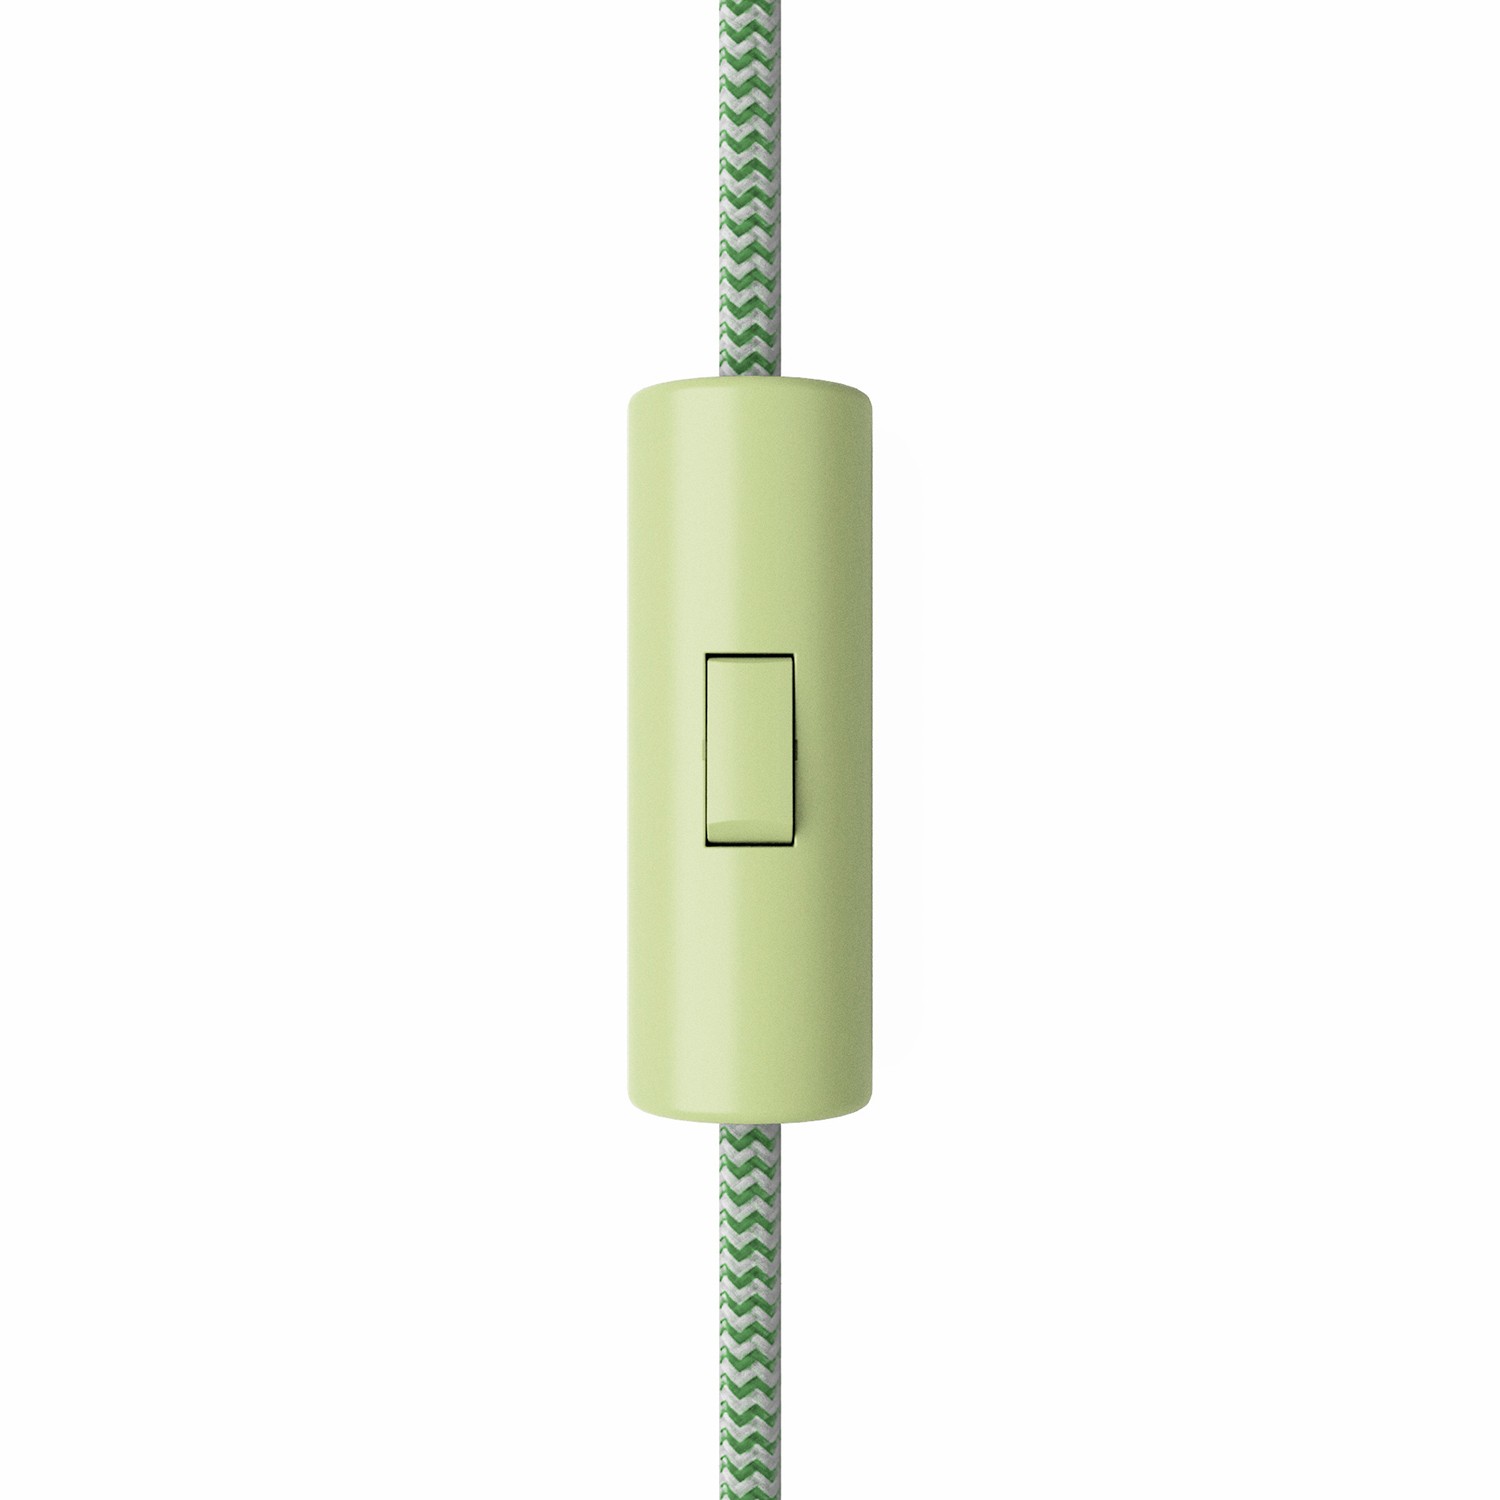 Rewireable cylindrical single pole rocker switch with earth terminal